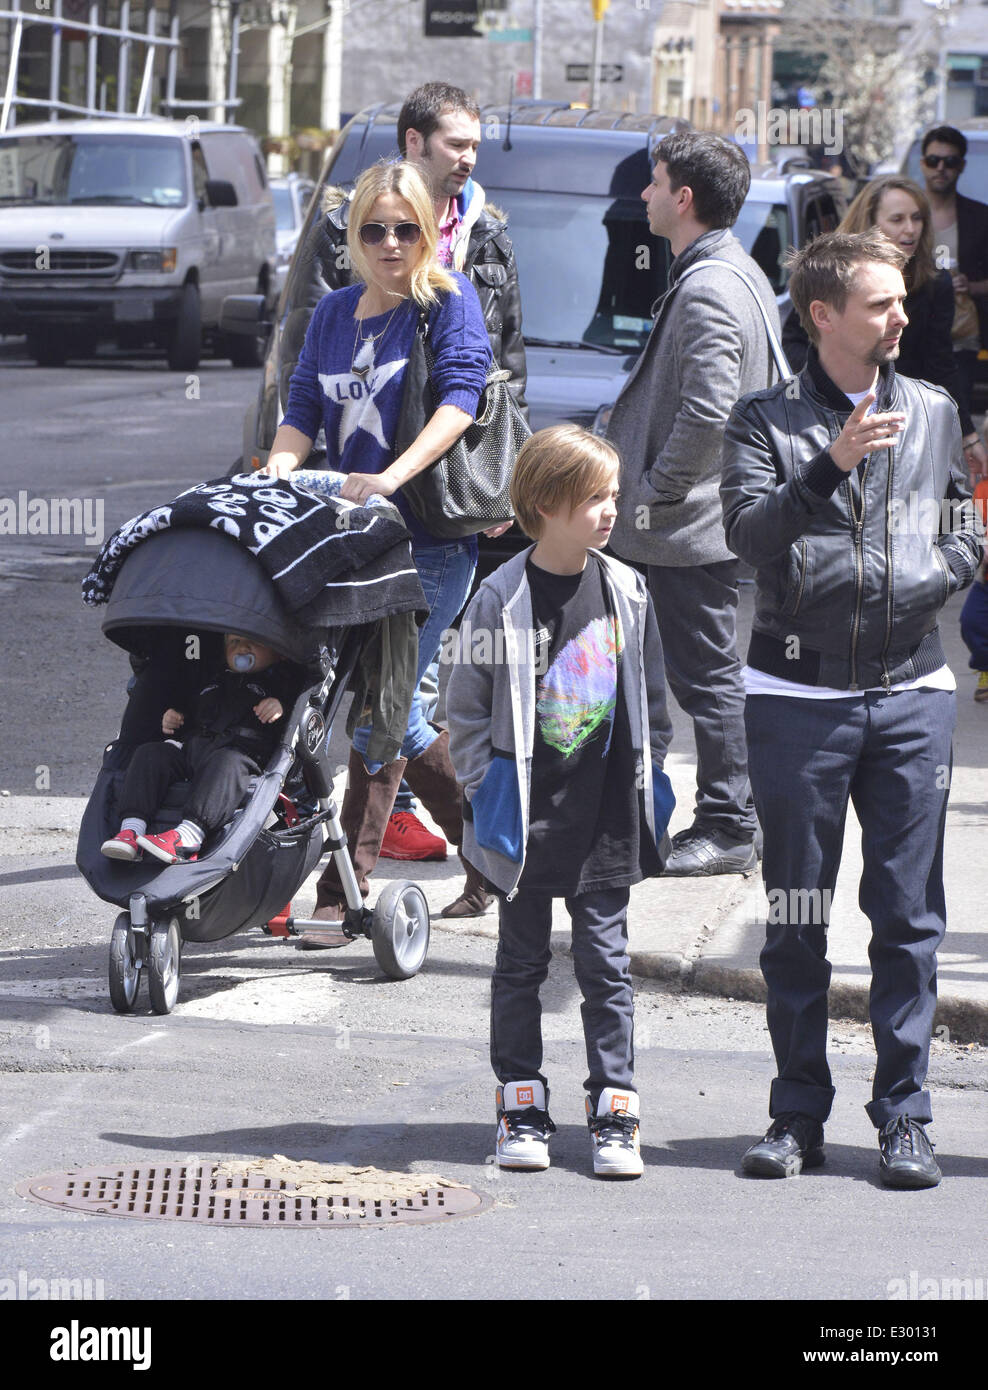 Kate Hudson takes her son Bingham Hawn Bellamy out in a stroller and head for lunch with family at Bubby's restaurant in Manhattan  Featuring: Kate Hudson,Matt Bellamy,Bingham Bellamy,Ryder Robinson Where: New York City, NY, United States When: 17 Apr 2013 Stock Photo